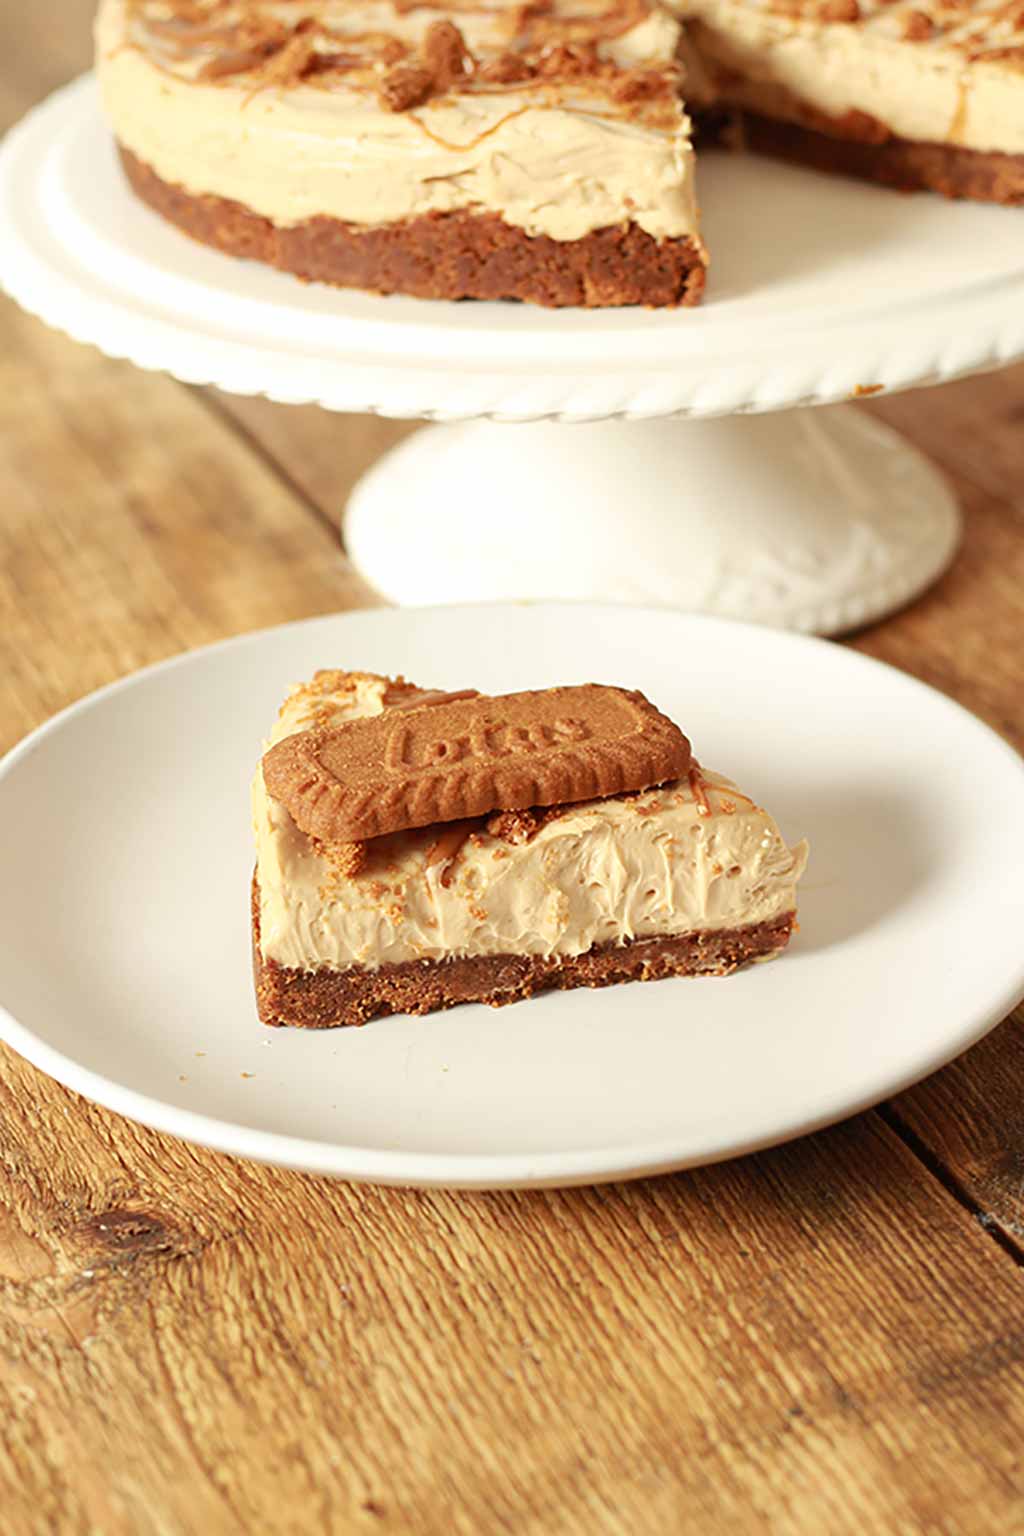 Slice Of vegan Biscoff Cheesecake On A White Plate With Remaining Cheesecake In The Background